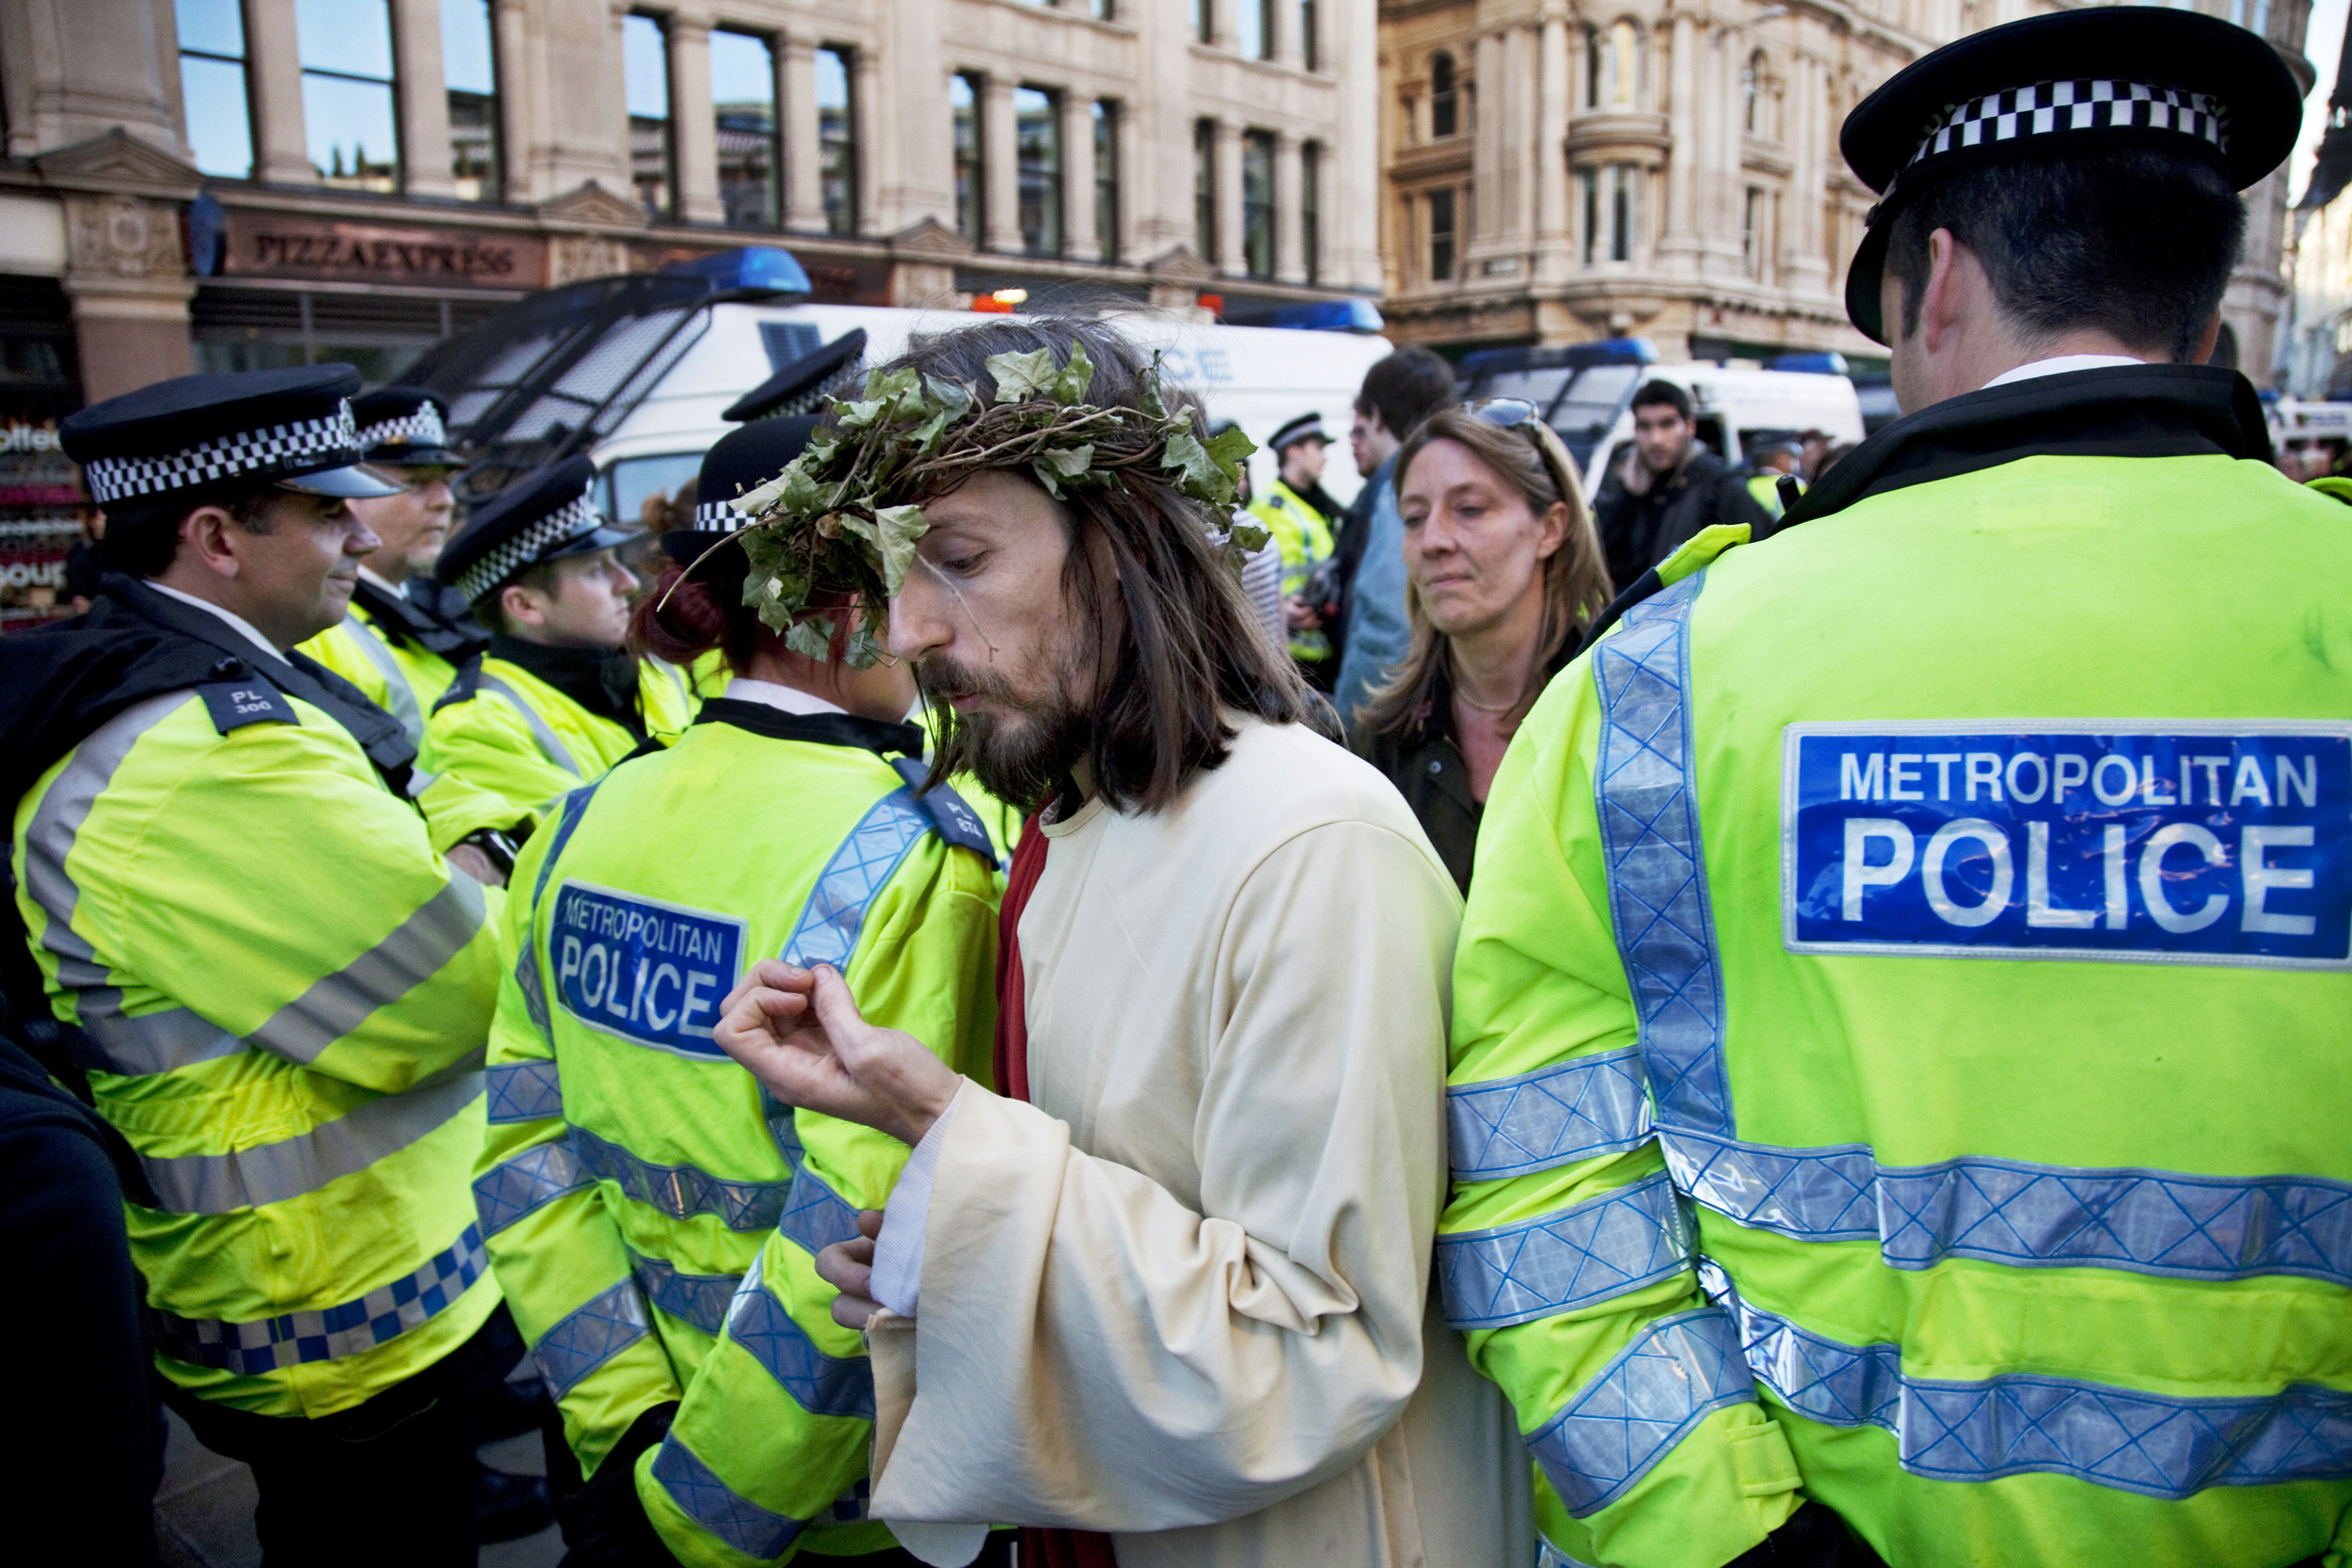  As Jesus walks through police lines at the Occupy London protest, he checks his nails. 